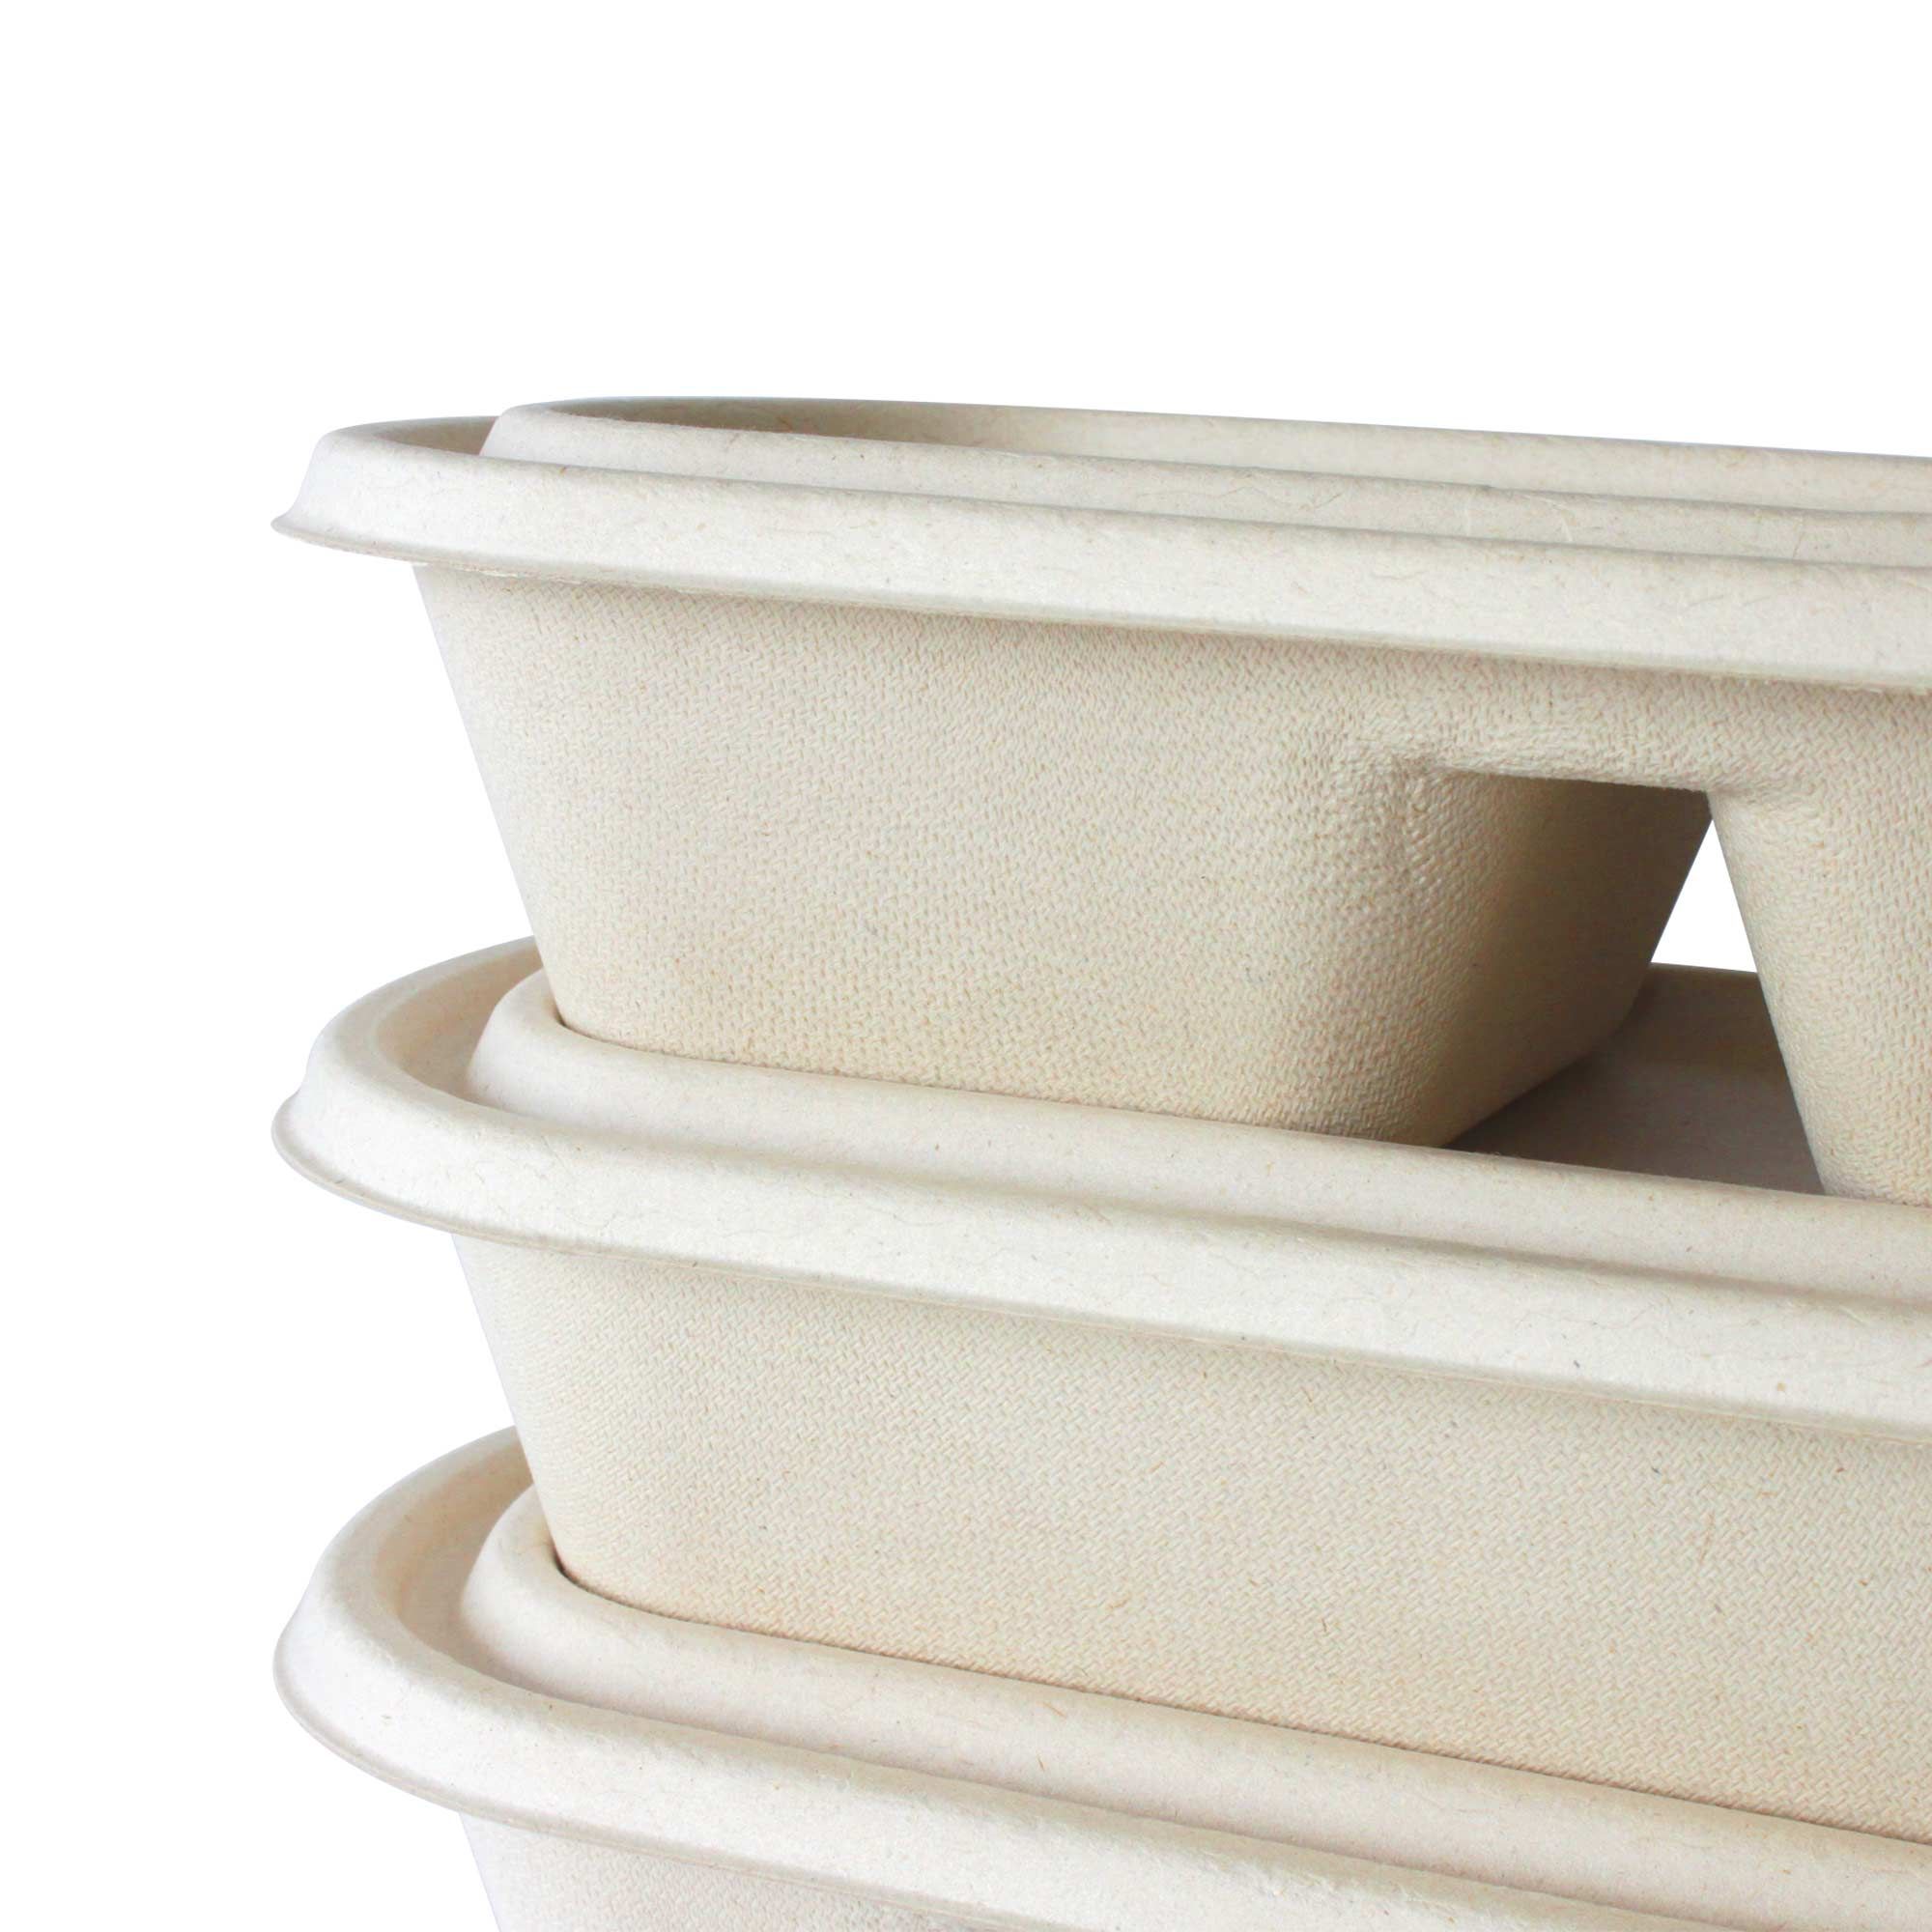 Sugarcane bagasse food container has a groove design on the container lid